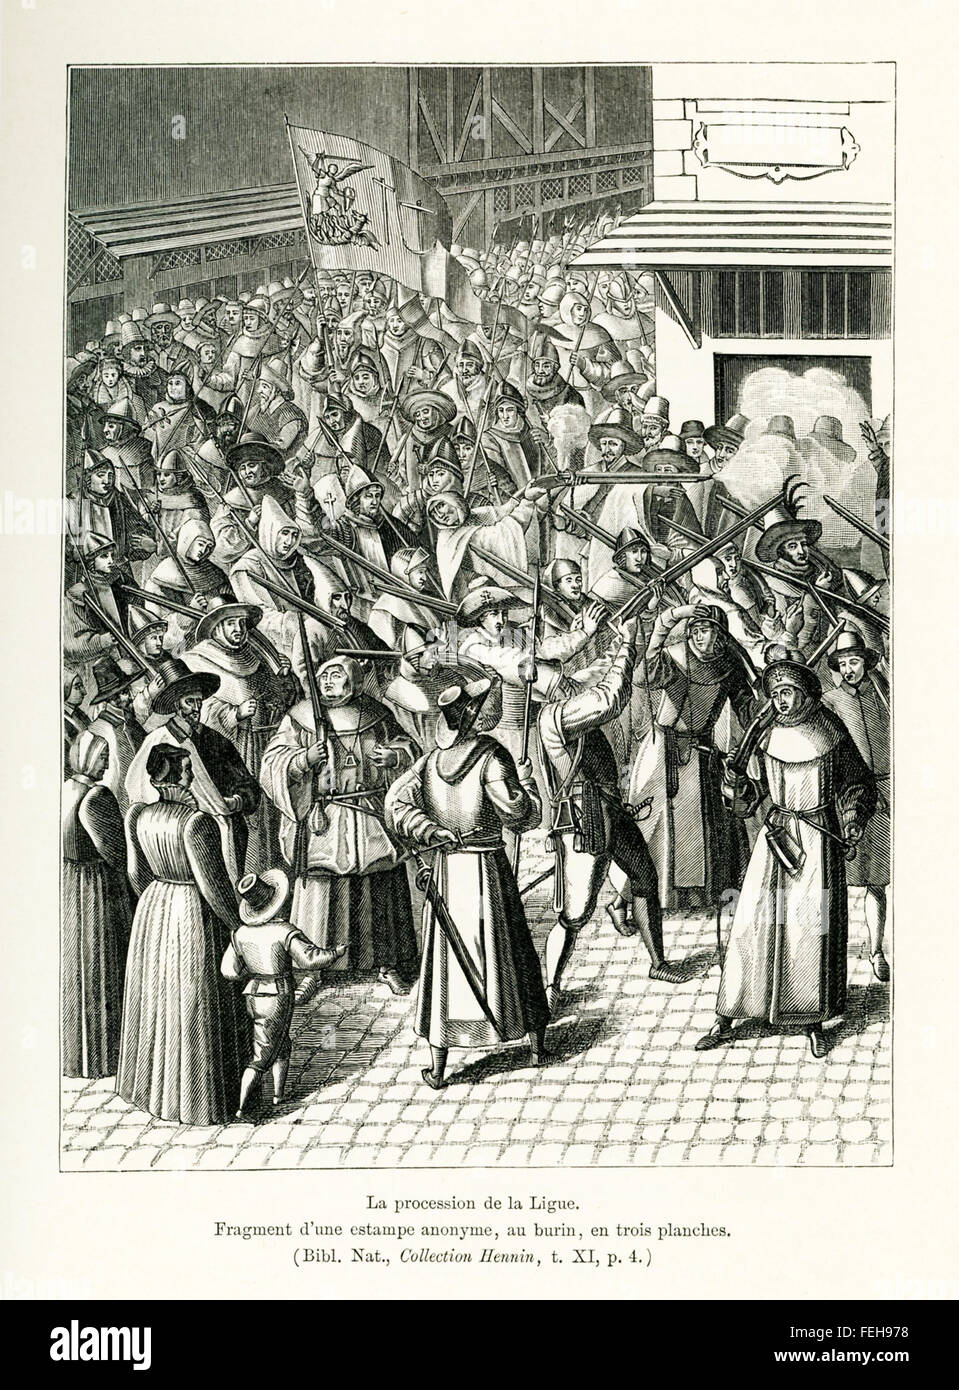 This 1800s engraving—on three boards— illustrates the 'Procession of the League.' The League referred to is the Catholic League,  also known as the Holy League. Here, the members are all shown armed and ready to do battle. The League was formed by he French Henry I, Duke of Guise, in 1576. It was the time of the Protestant Reformation, the Wars of Religions, and Henry I's intent was to eliminate Protestantism in France. Stock Photo